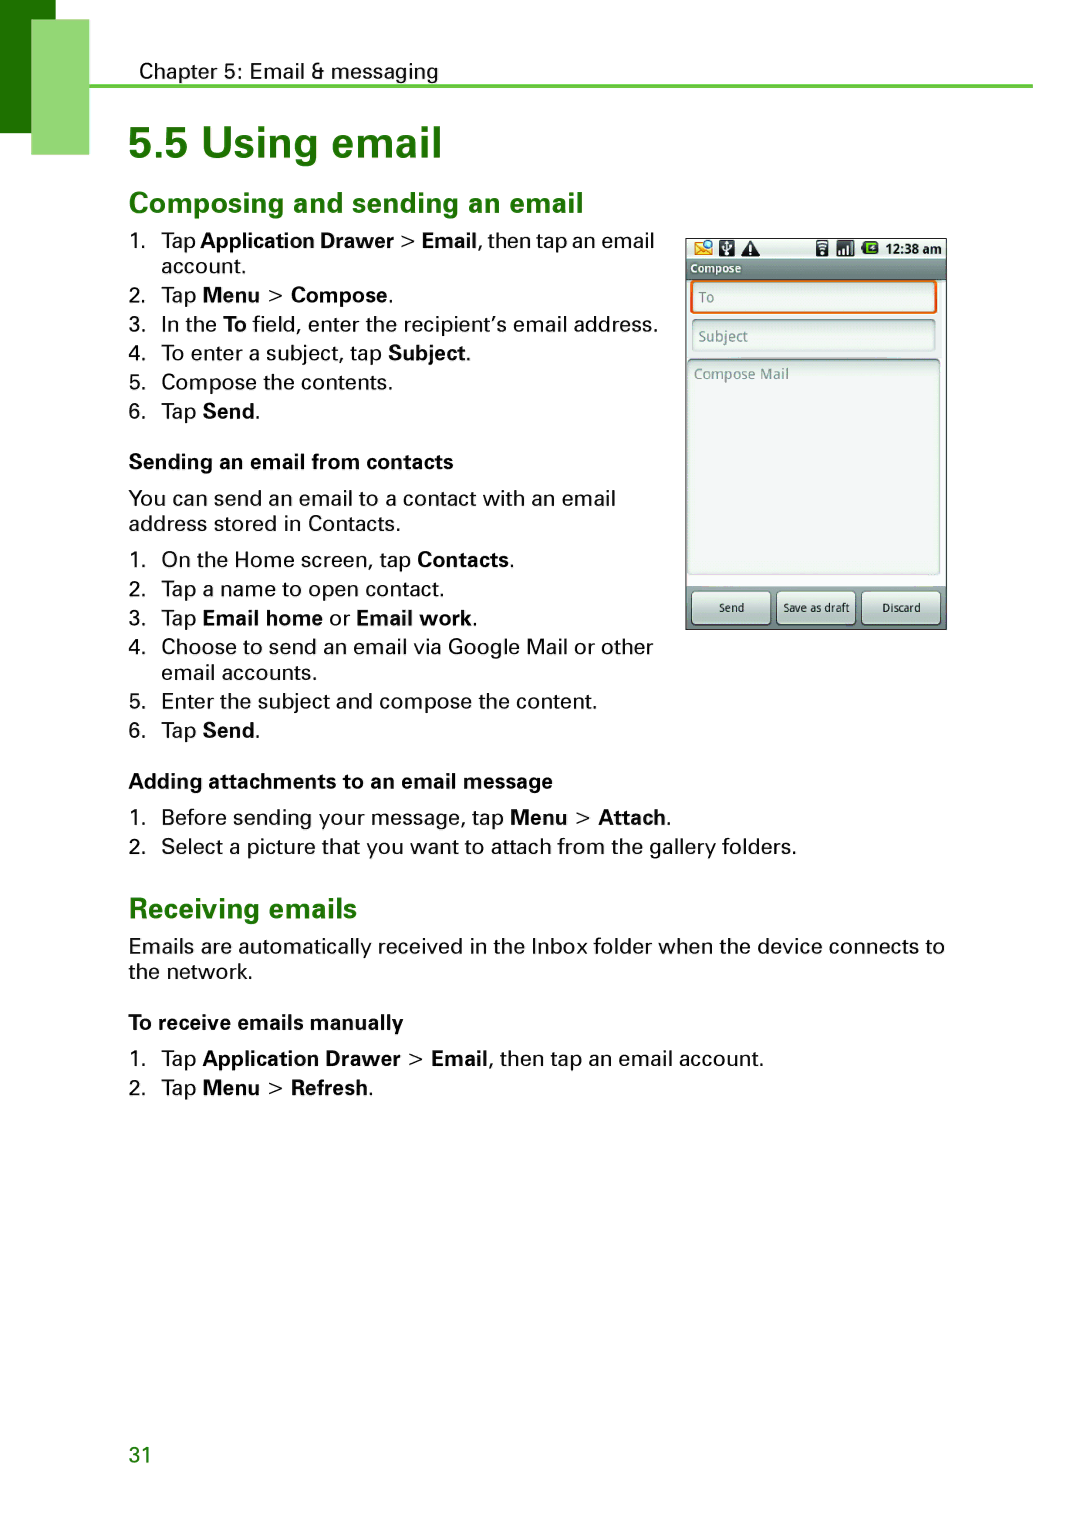 Motorola XT502 manual Using email, Composing and sending an email, Receiving emails 